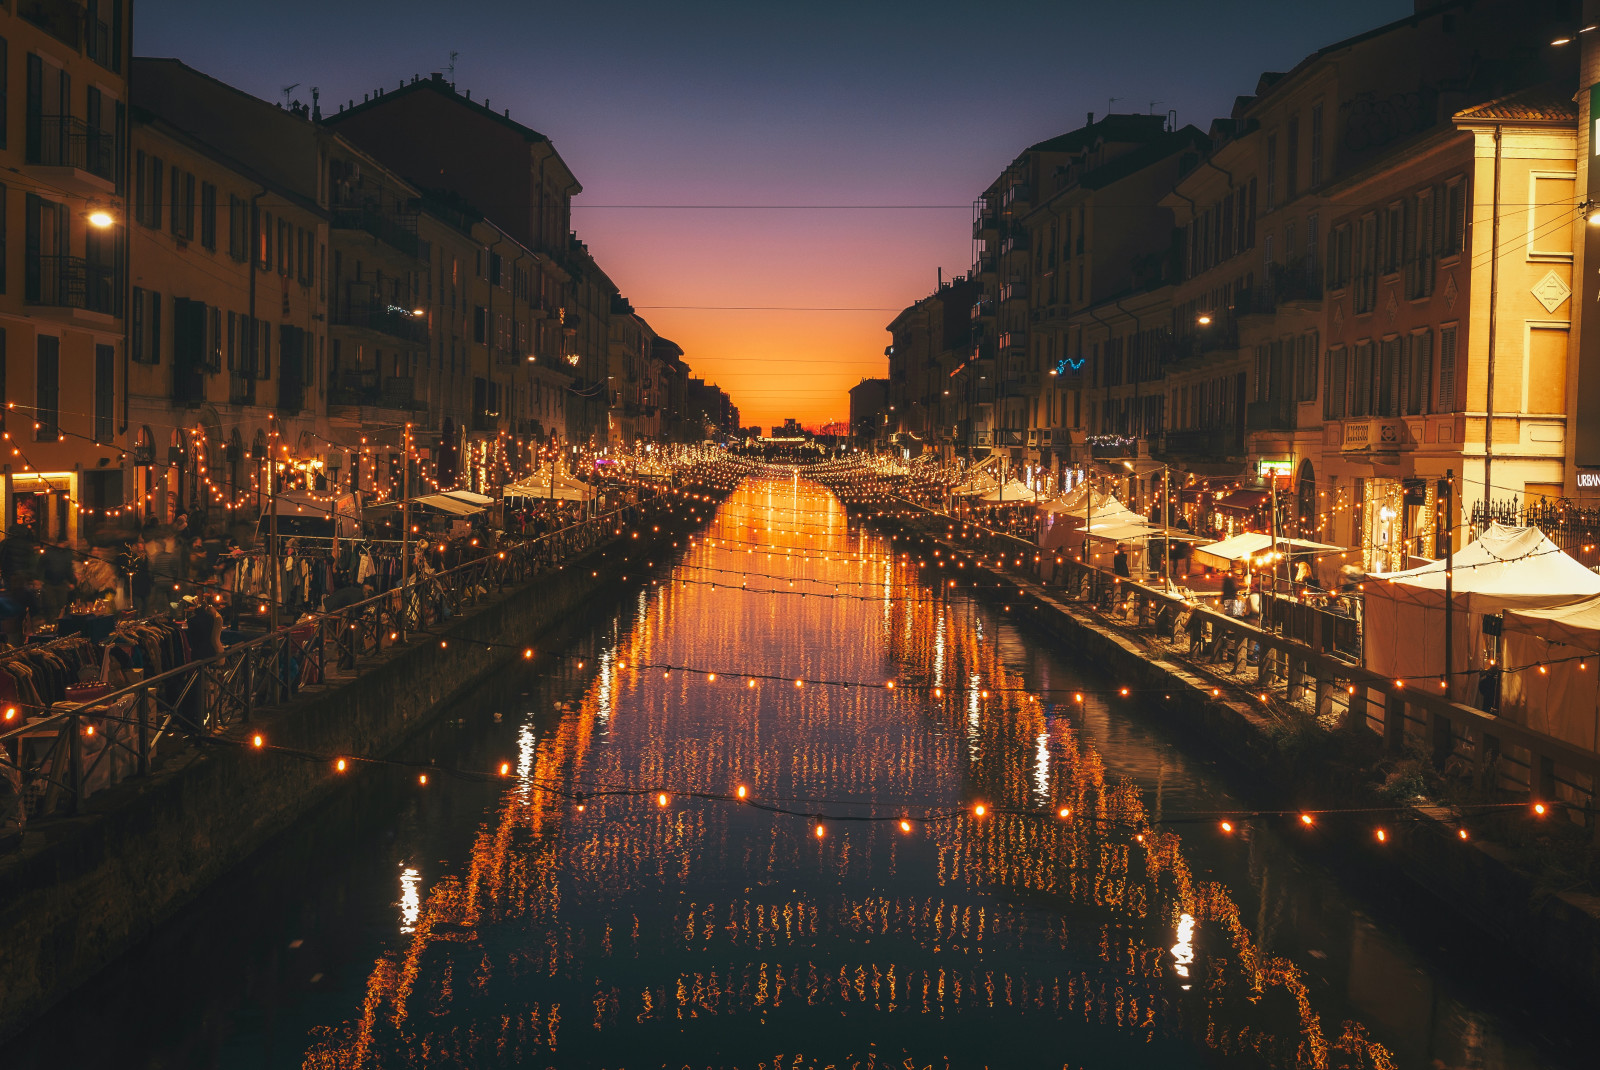 Orange string lights over a canal in Milan, Italy.